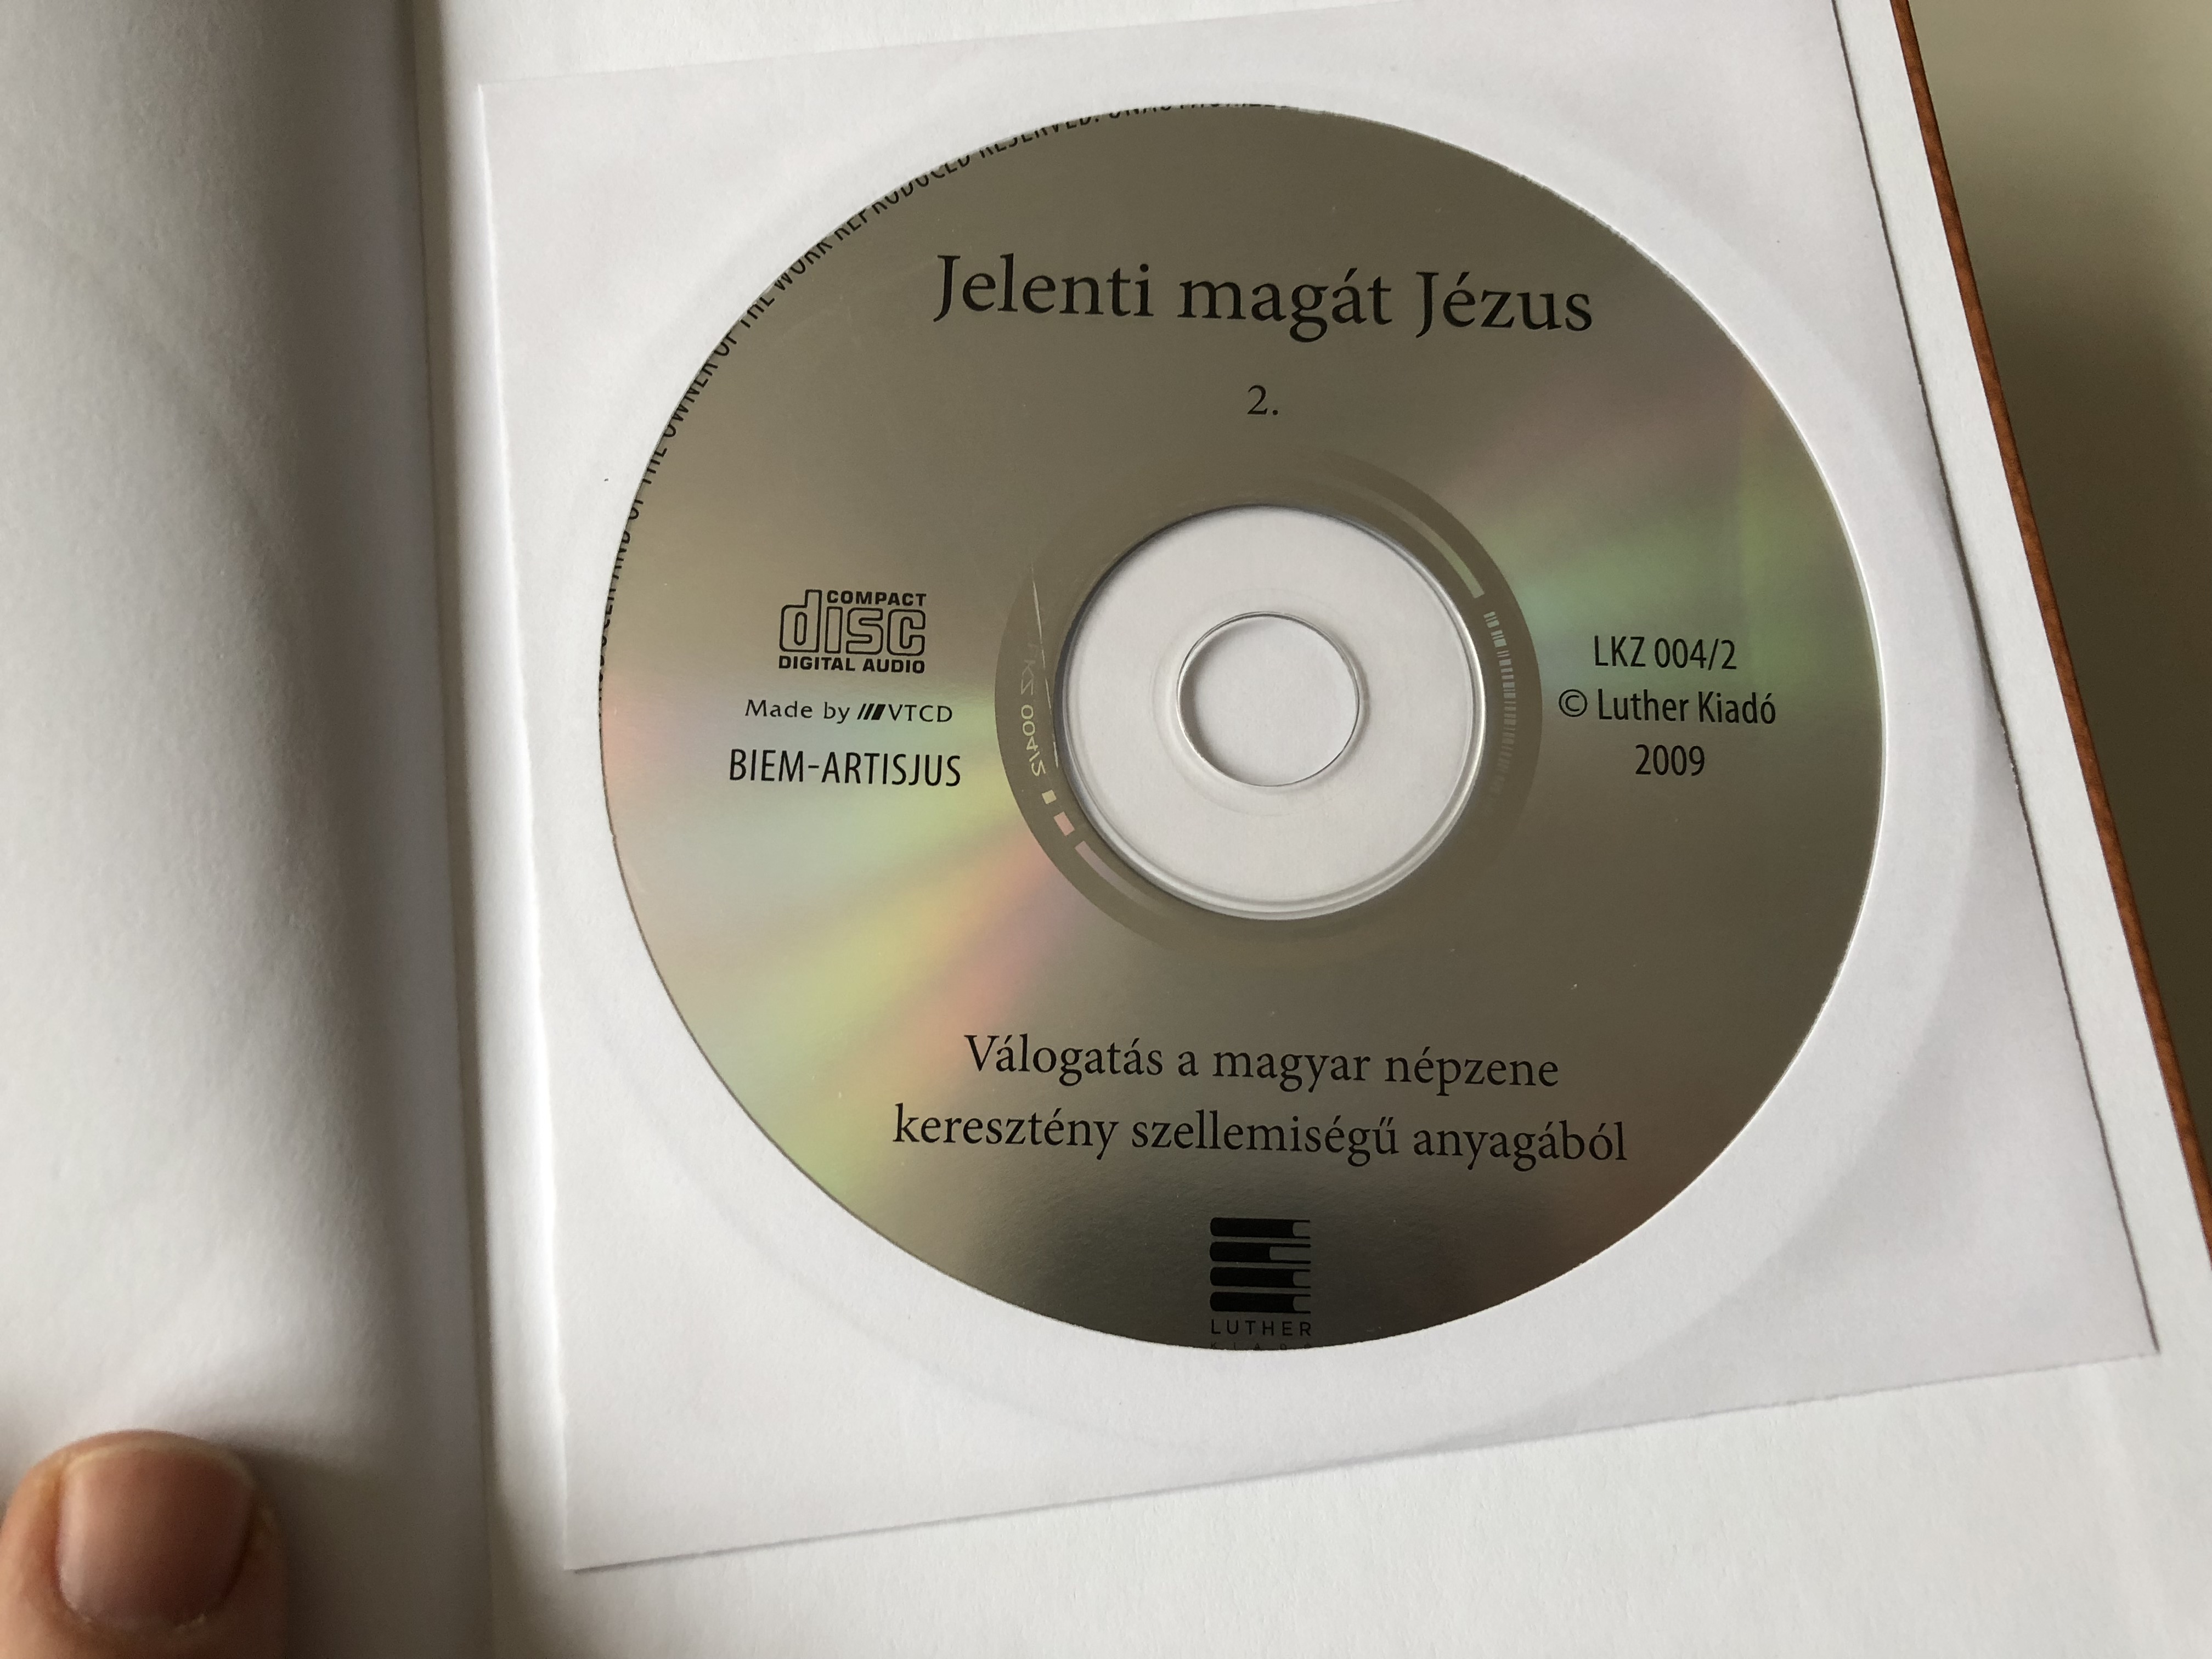 jelenti-mag-t-j-zus-cd-mell-klettel-jesus-appears-selection-of-100-hungarian-folk-songs-inspired-by-christianity-includes-2-cds-hardcover-luther-kiad-2009-19-.jpg